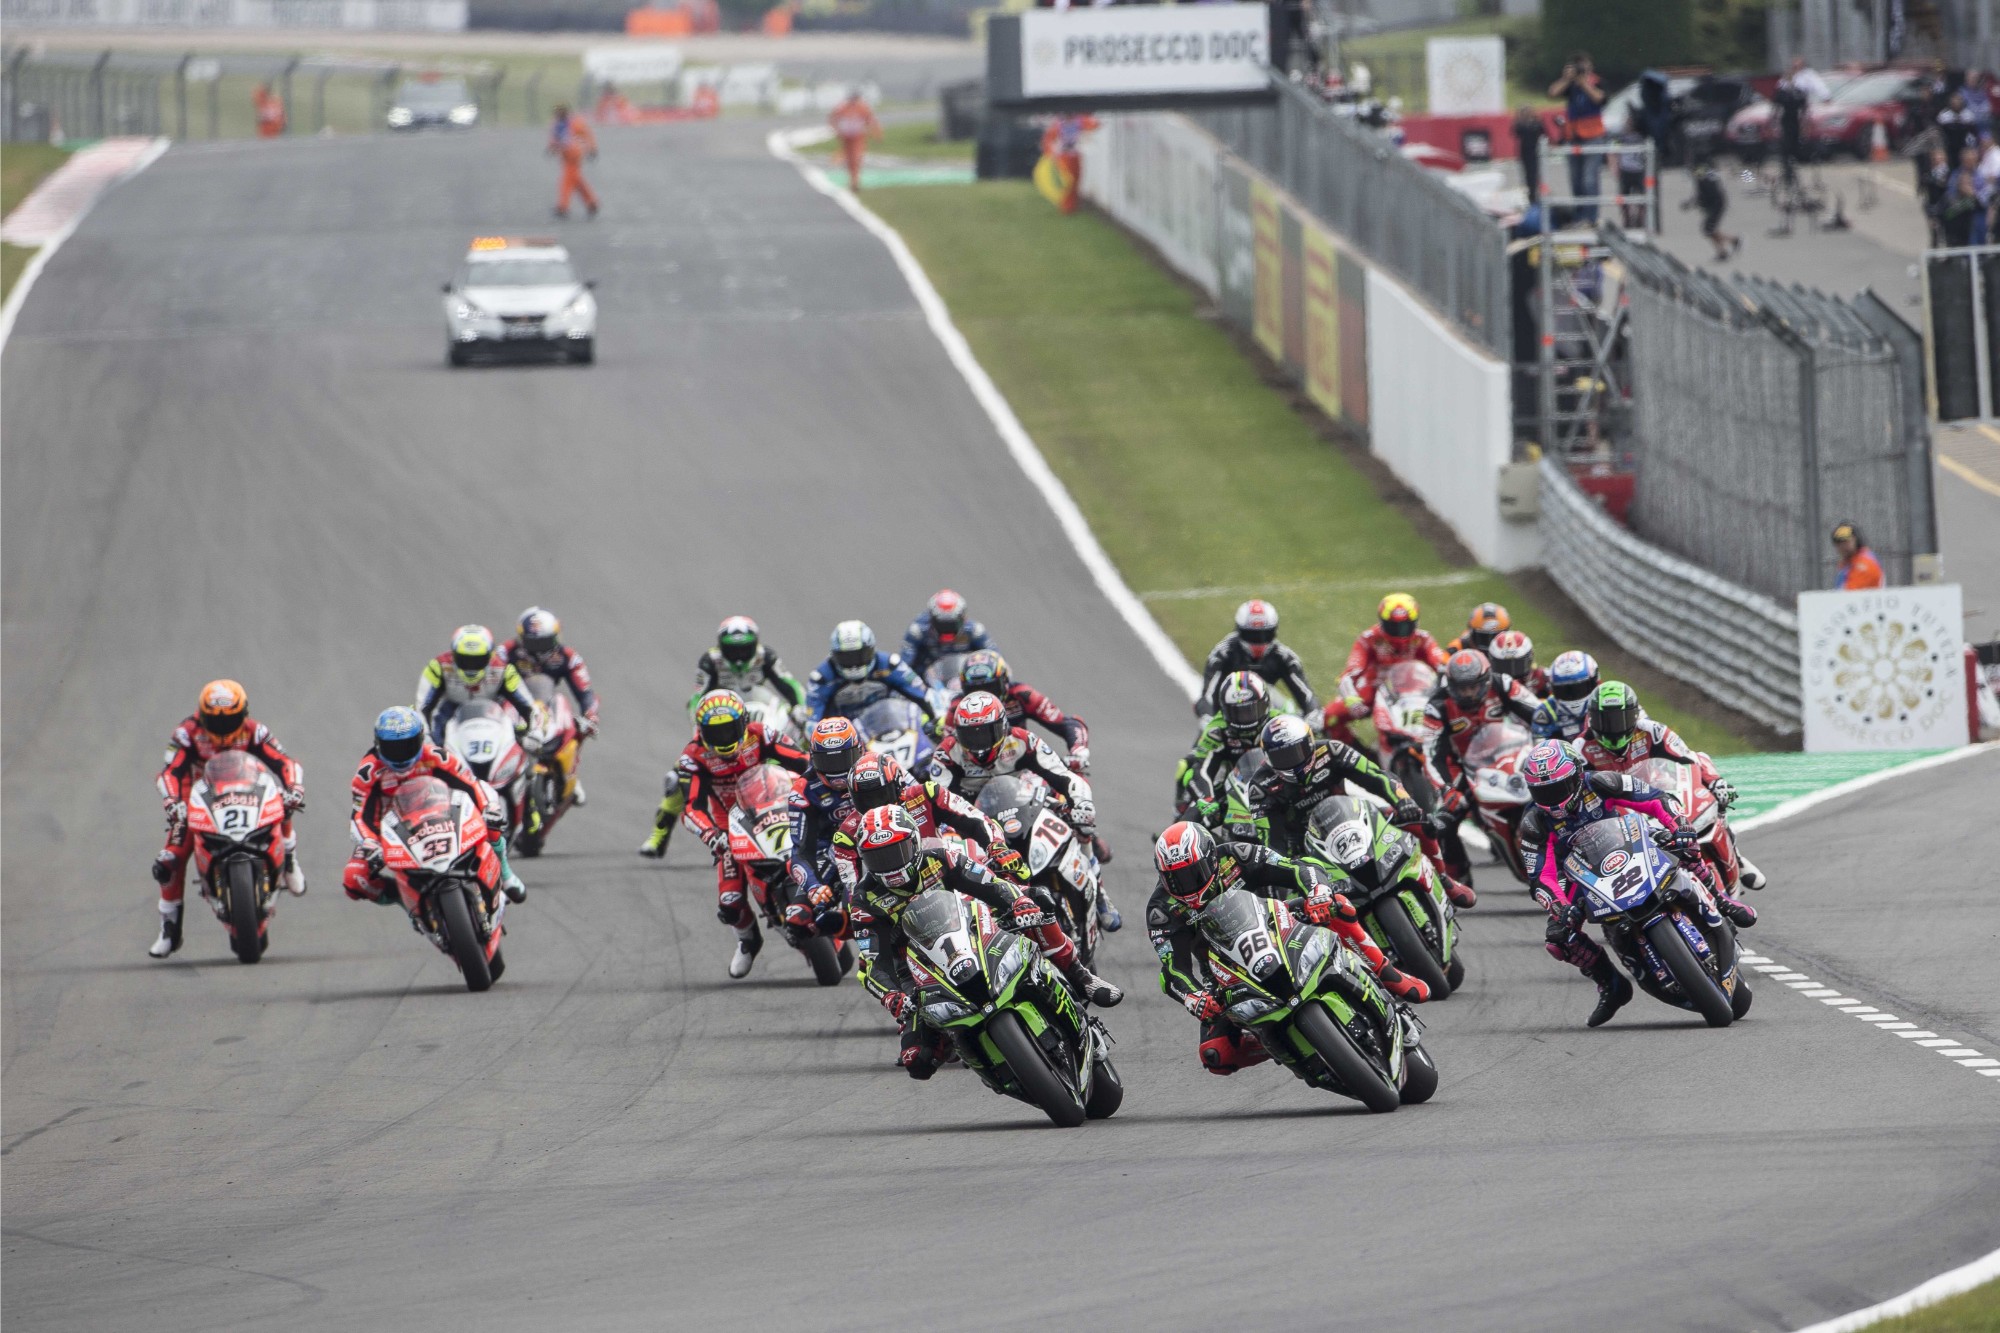 World Superbike Race One Results From Donington Park (Updated